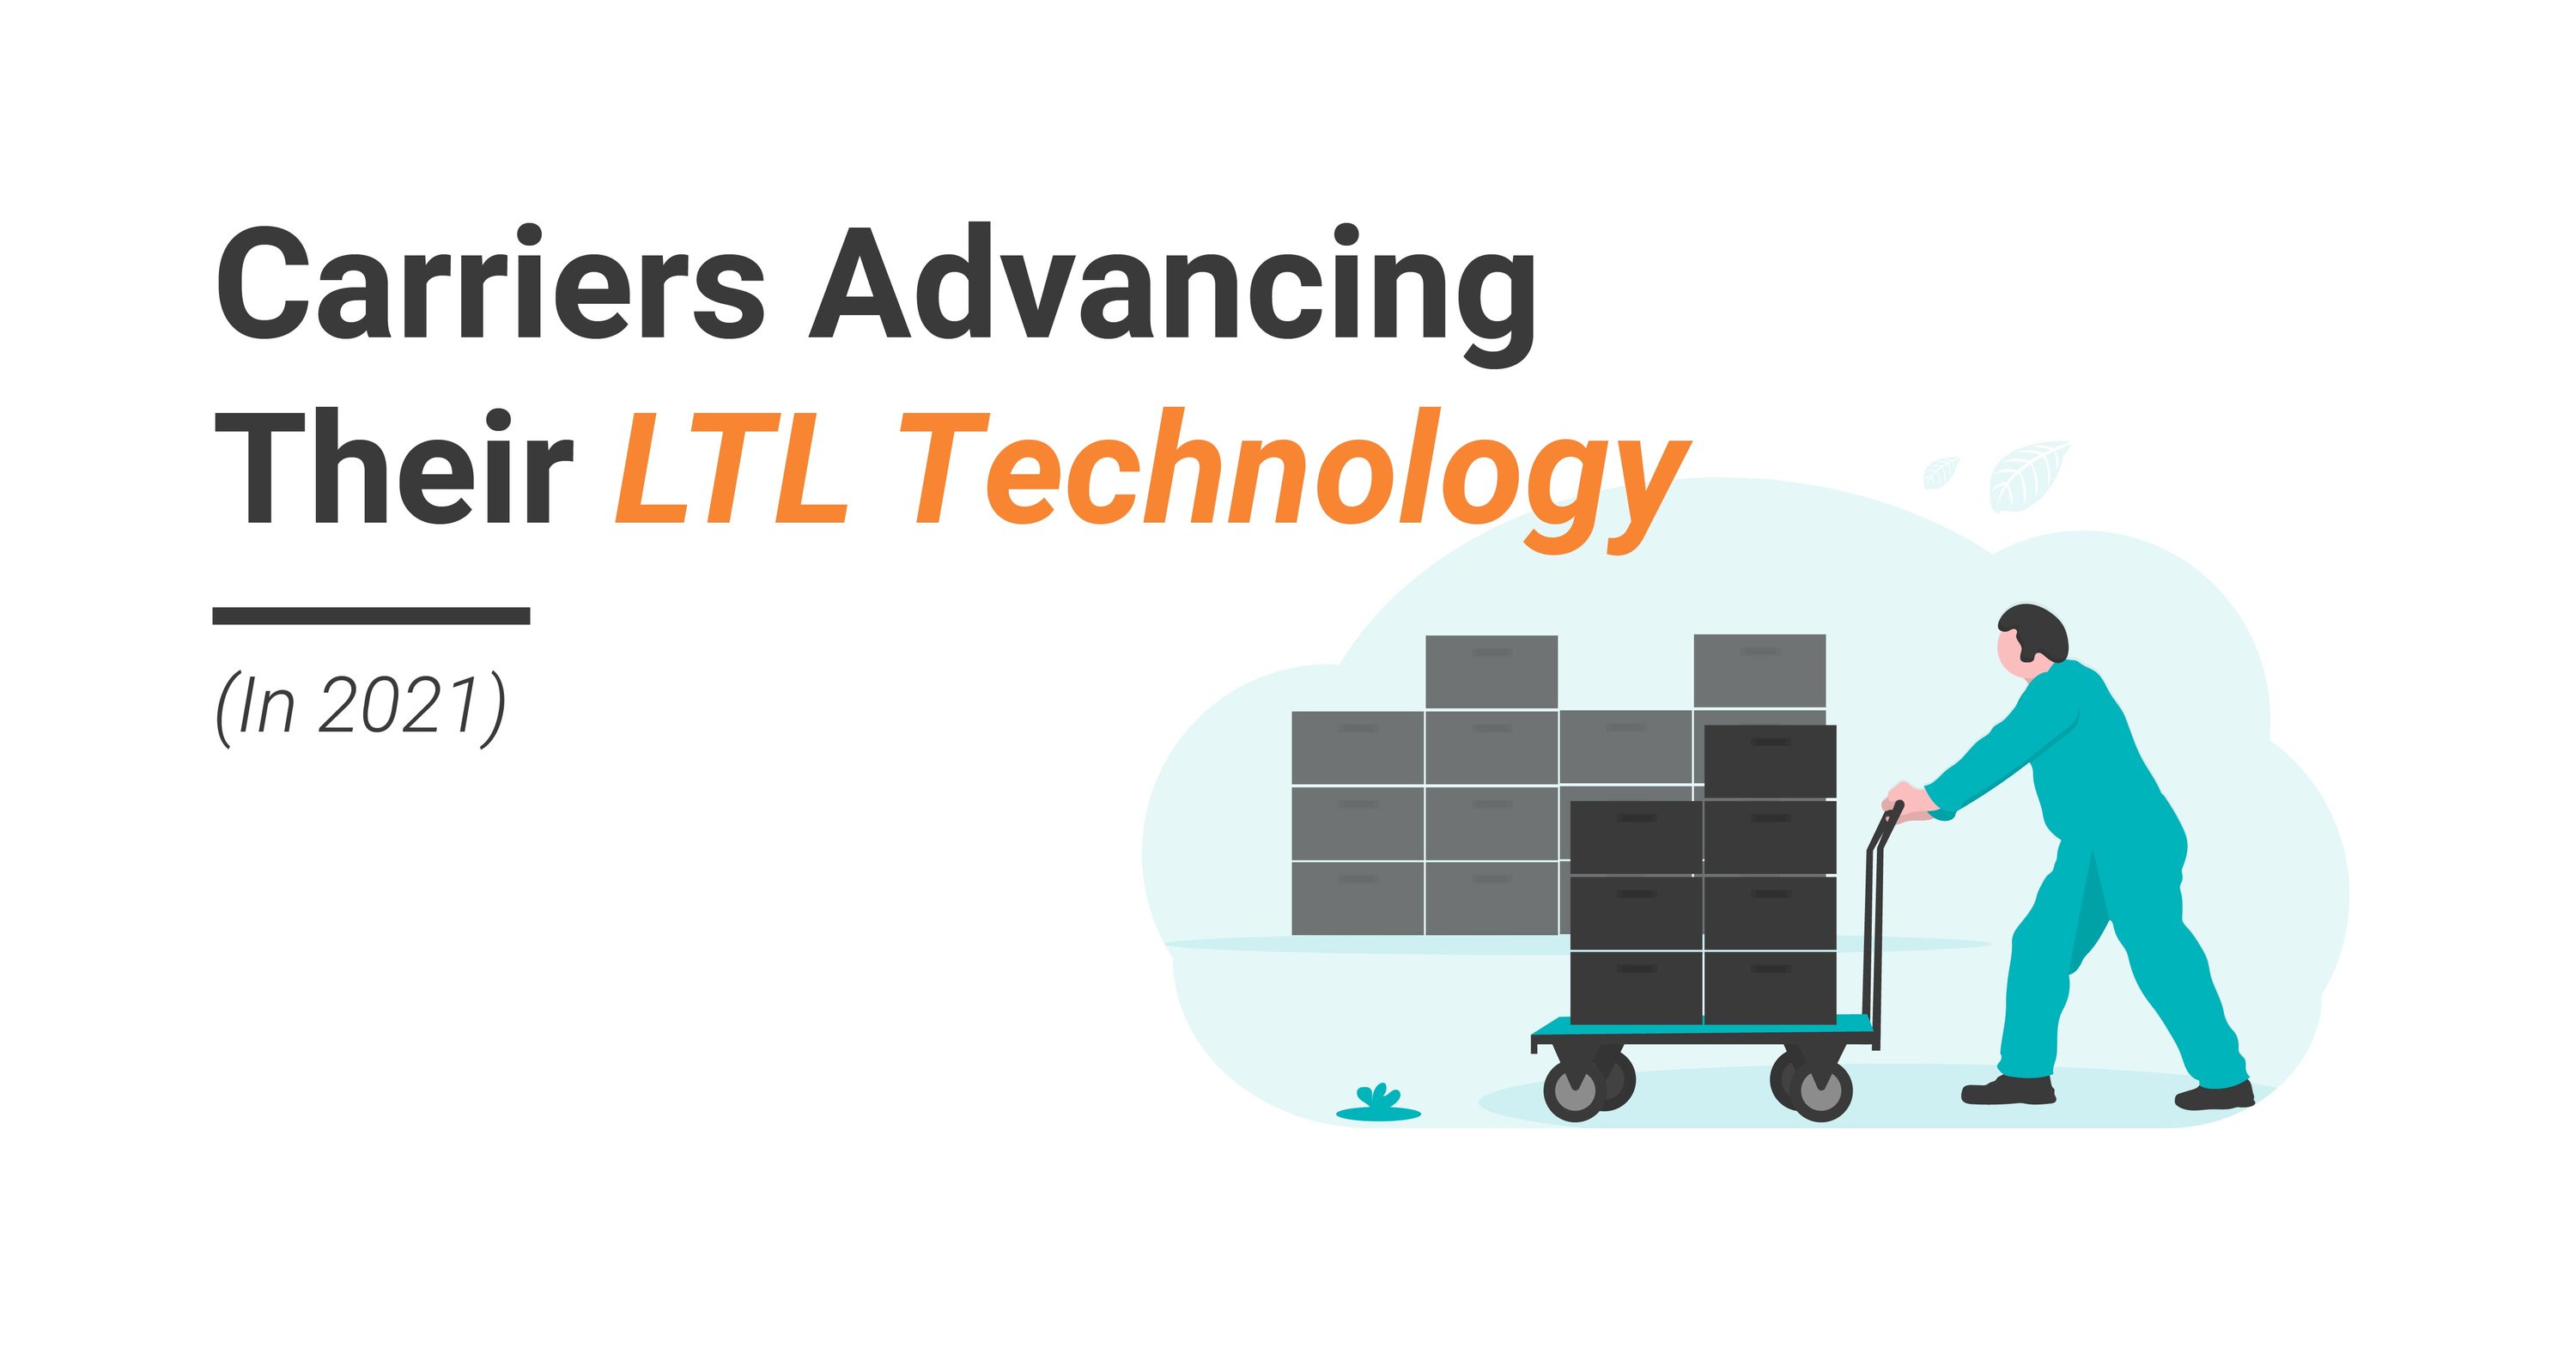 Carriers Advancing Their LTL Technology in 2021